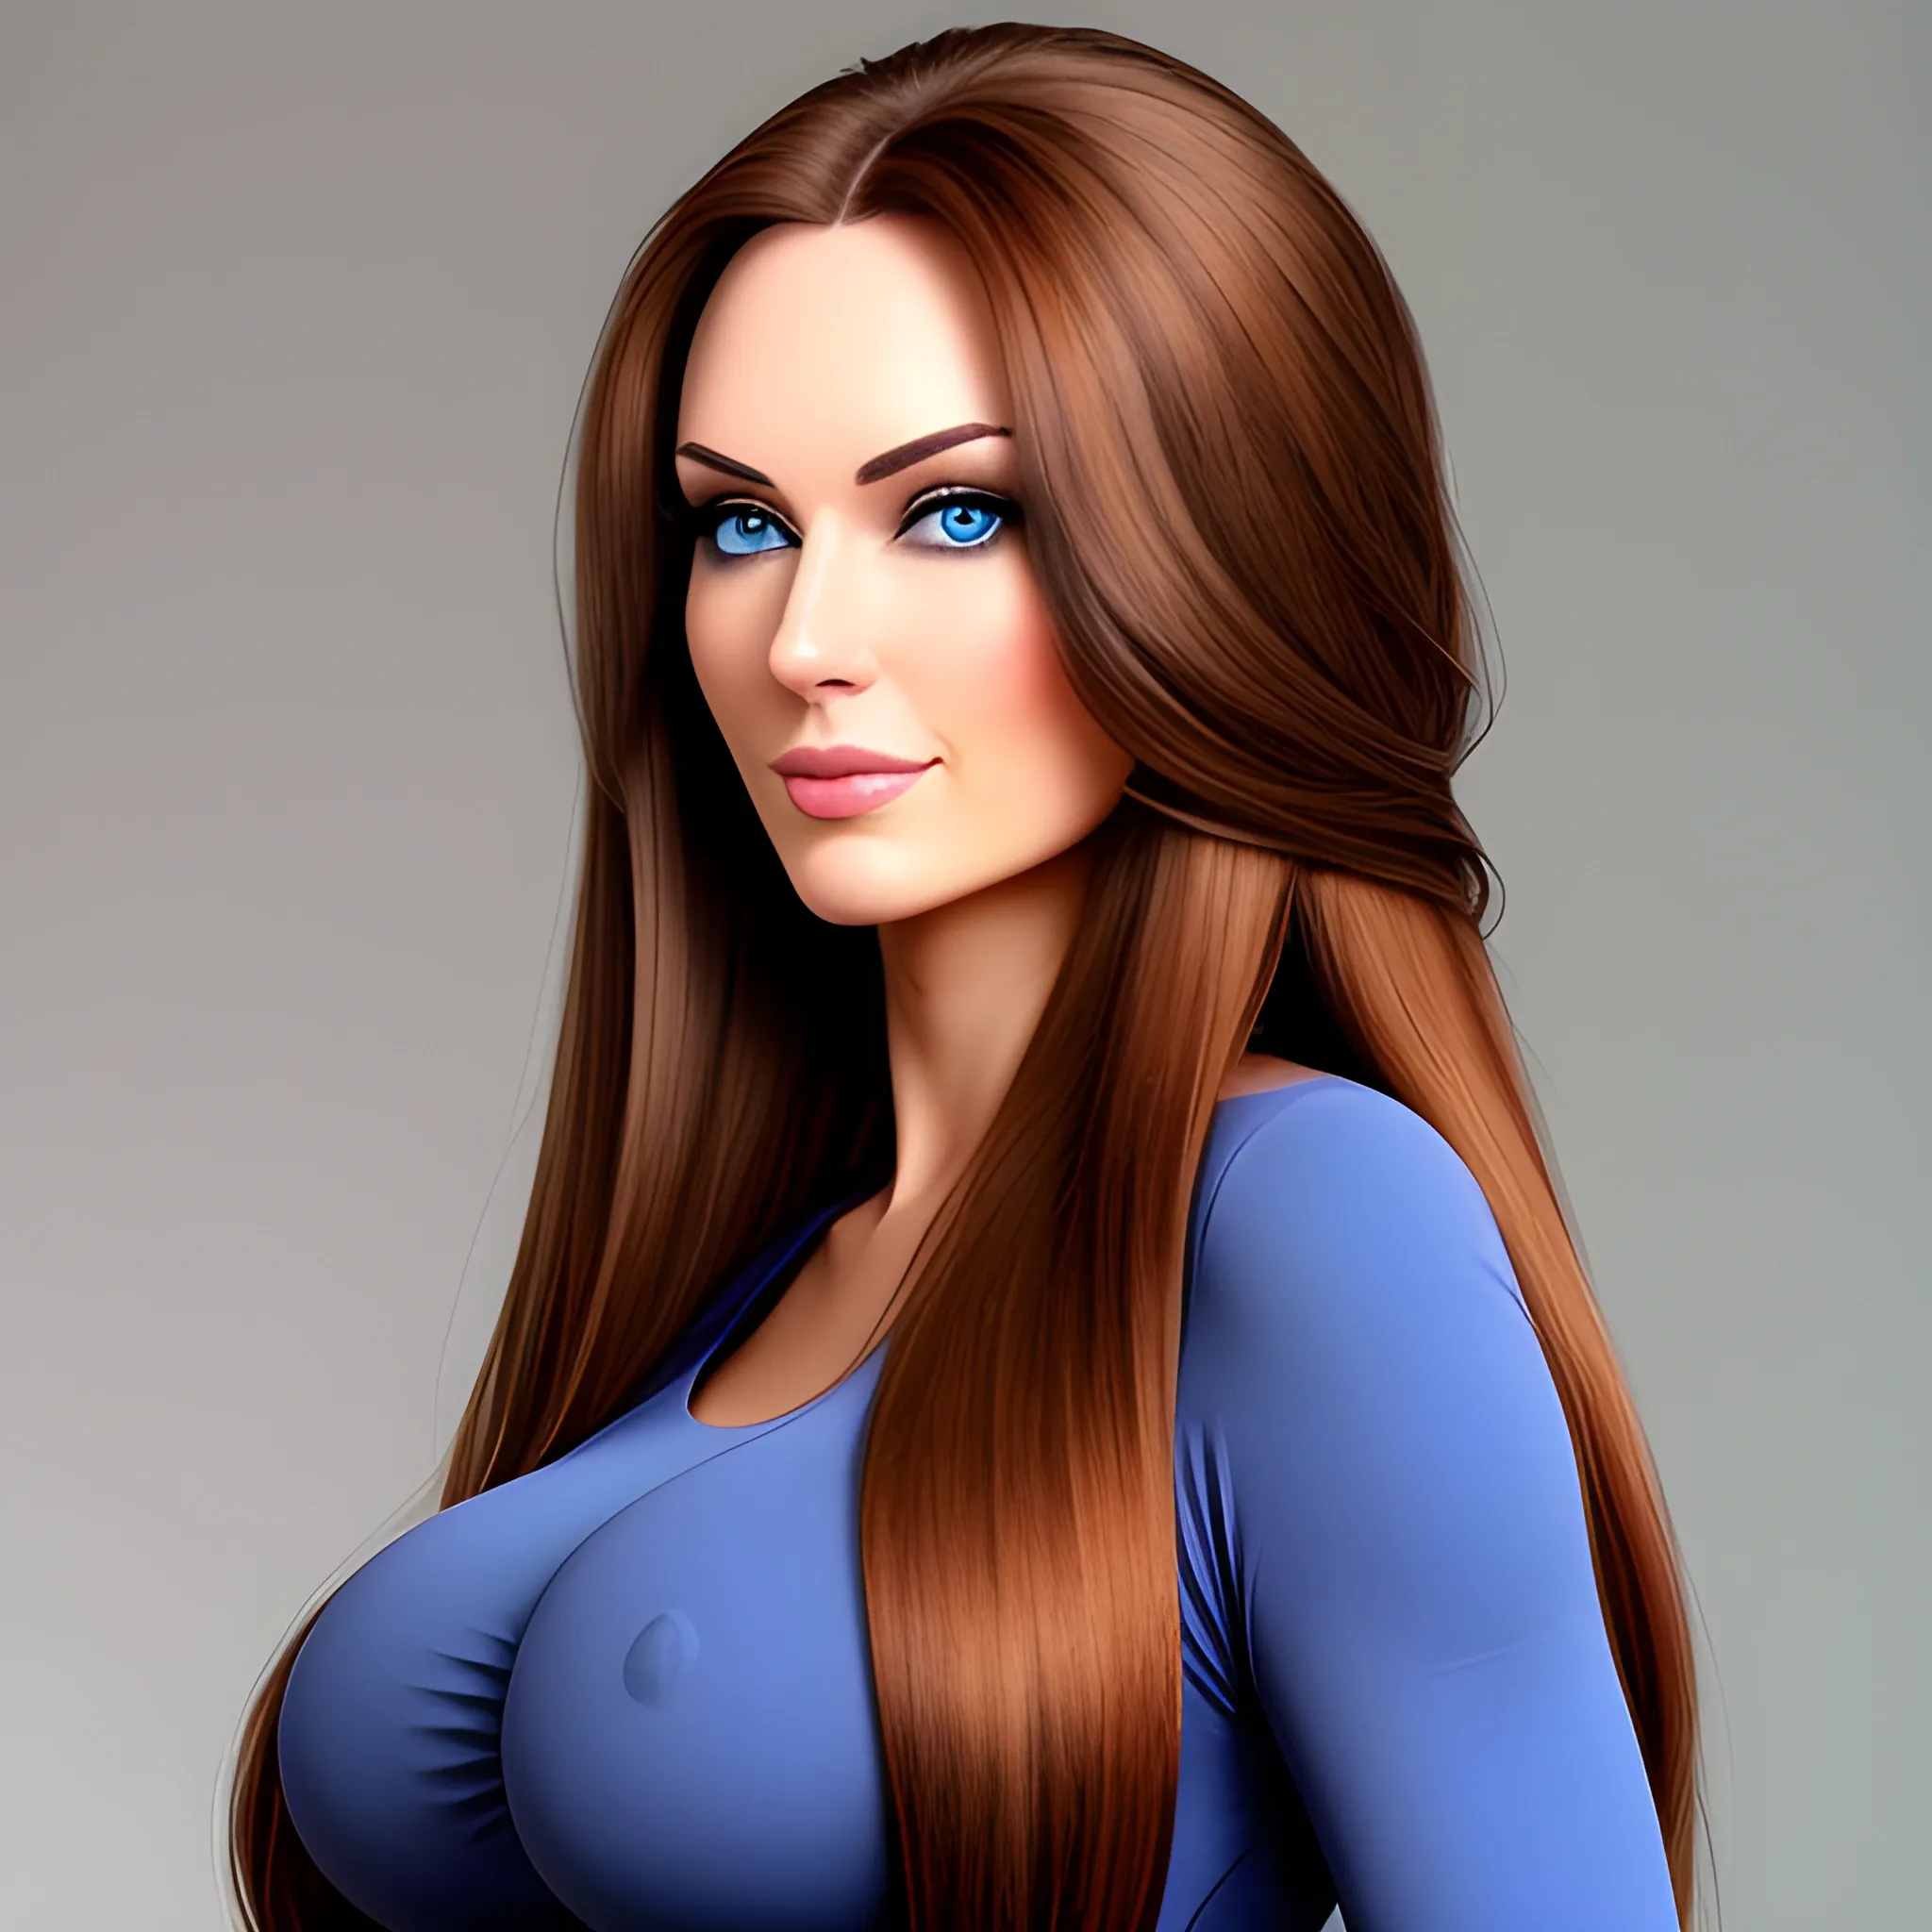 cute girl, abnormally long brown hair, blue eyes, above average breast size, full body from head to feet, side profile, above average posterior size